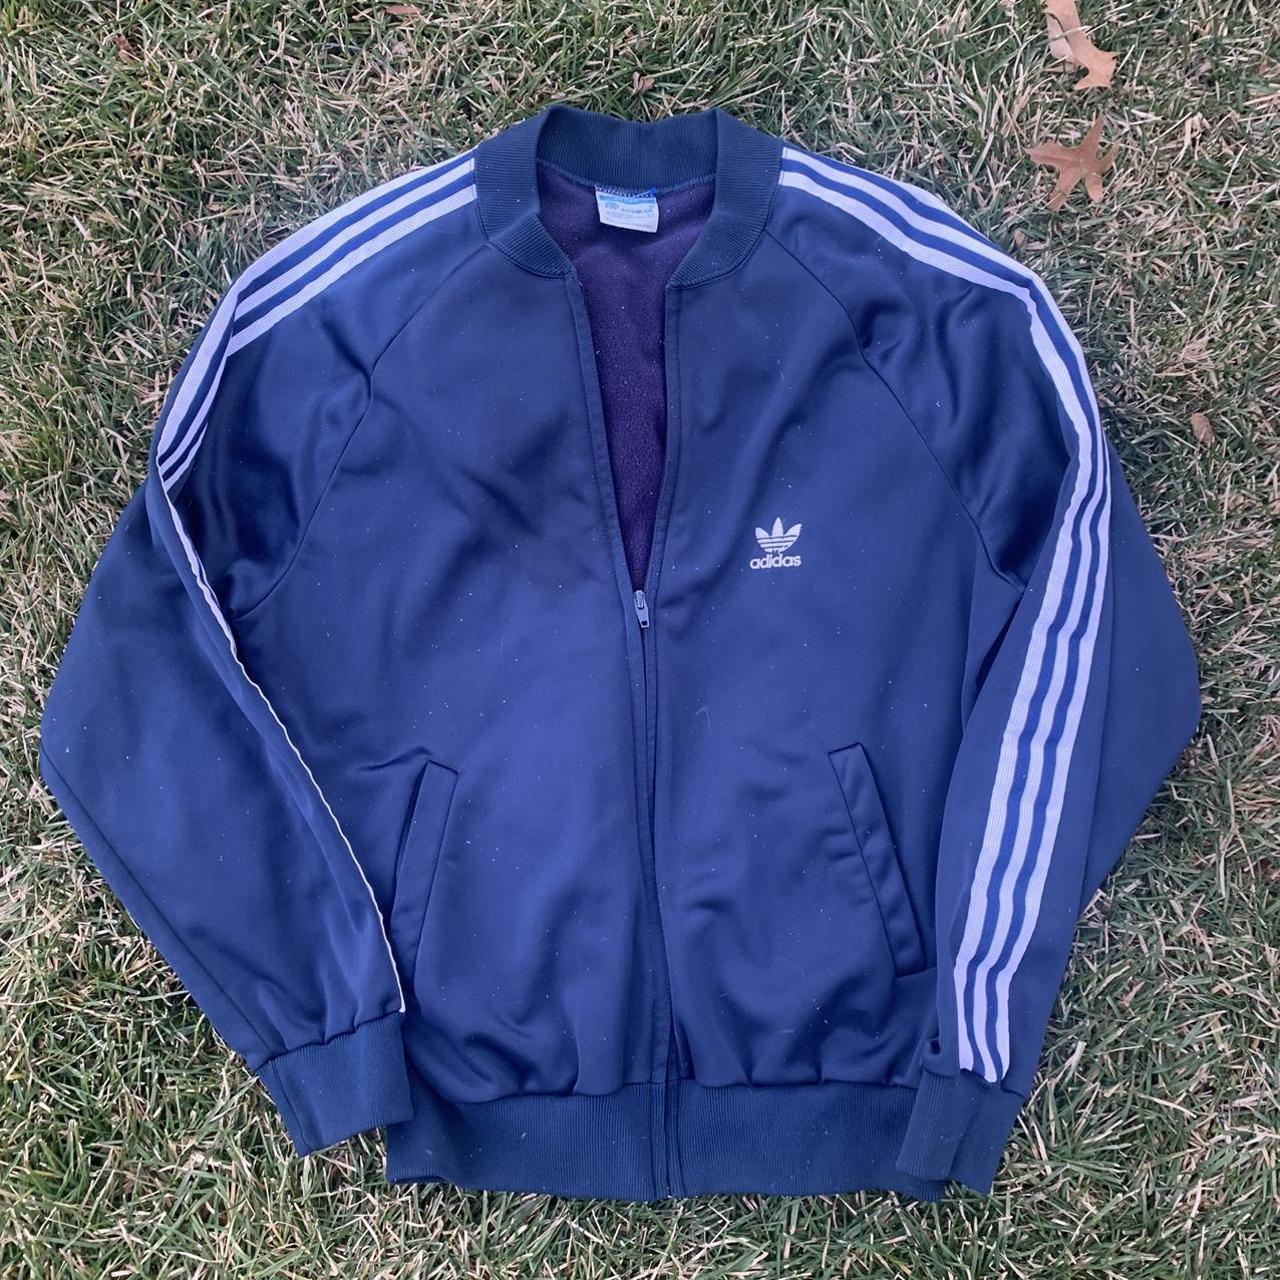 Beautiful 70s/80s adidas track bomber jacket. This... - Depop